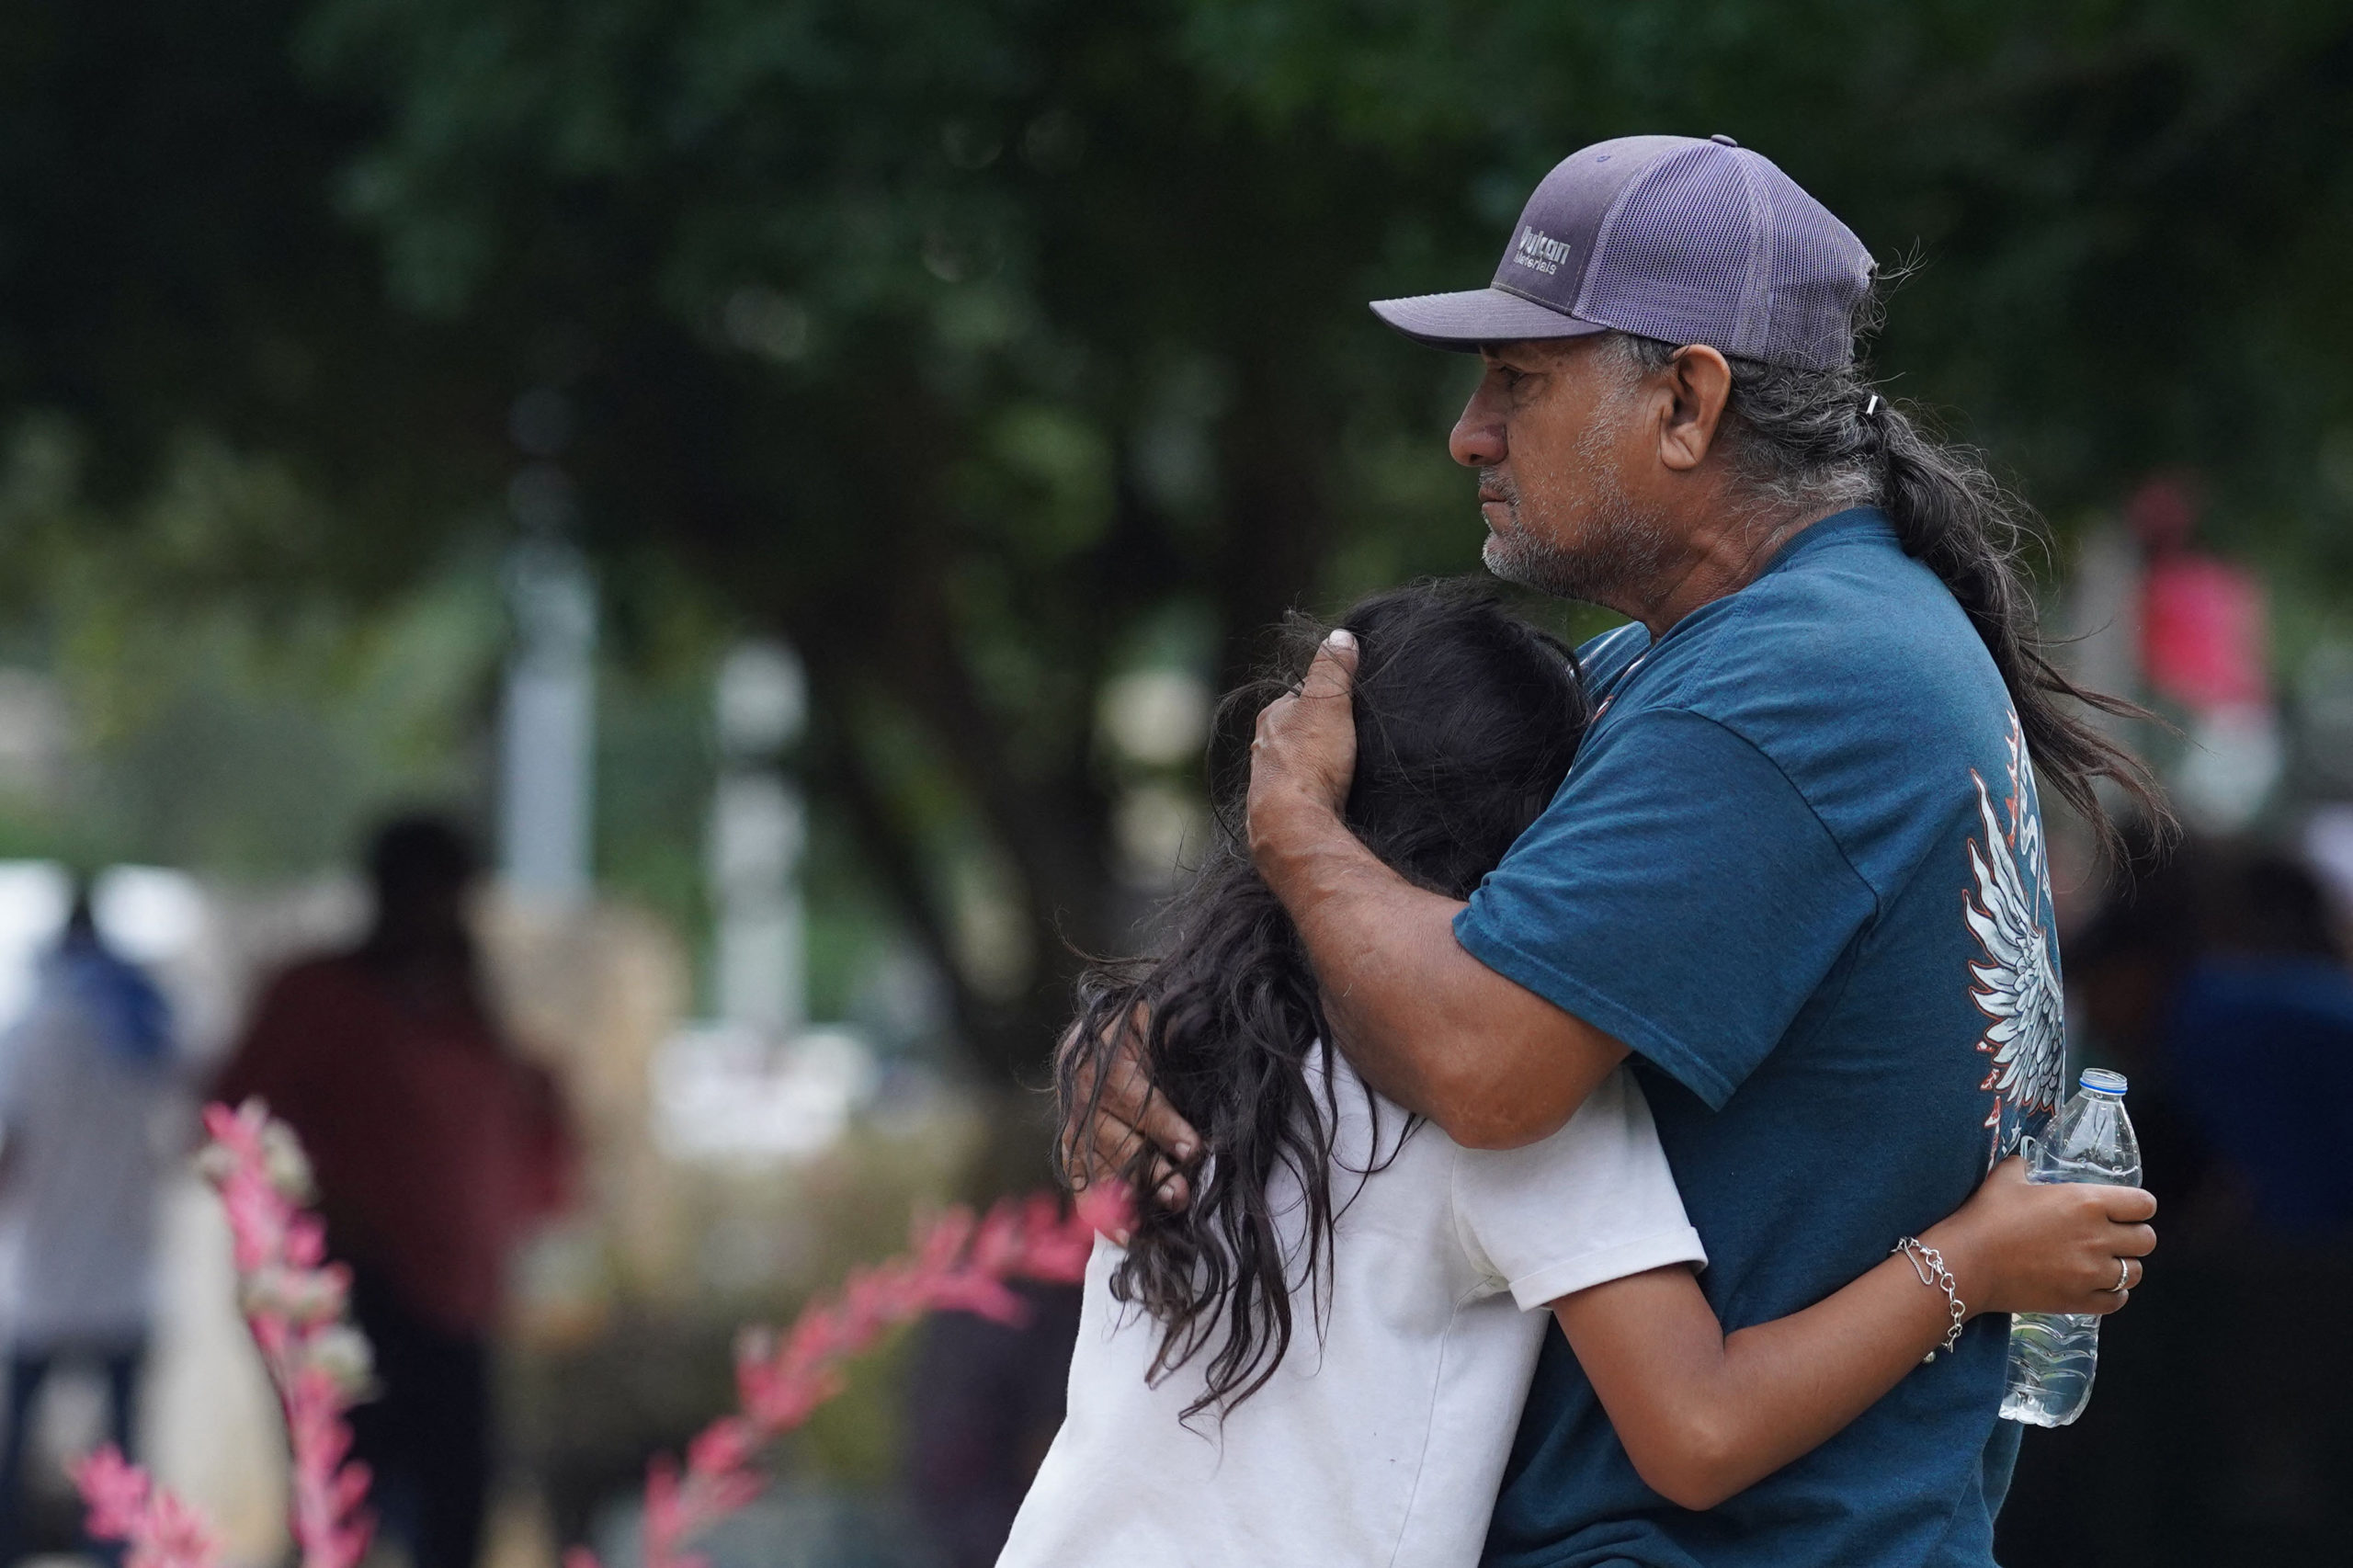 Families hug outside the Willie de Leon Civic Center where grief counseling will be offered in Uvalde, Texas, on May 24, 2022. - A teenage gunman killed 18 young children in a shooting at an elementary school in Texas on Tuesday, in the deadliest US school shooting in years. The attack in Uvalde, Texas -- a small community about an hour from the Mexican border -- is the latest in a spree of deadly shootings in America, where horror at the cycle of gun violence has failed to spur action to end it. (Photo by ALLISON DINNER/AFP via Getty Images)